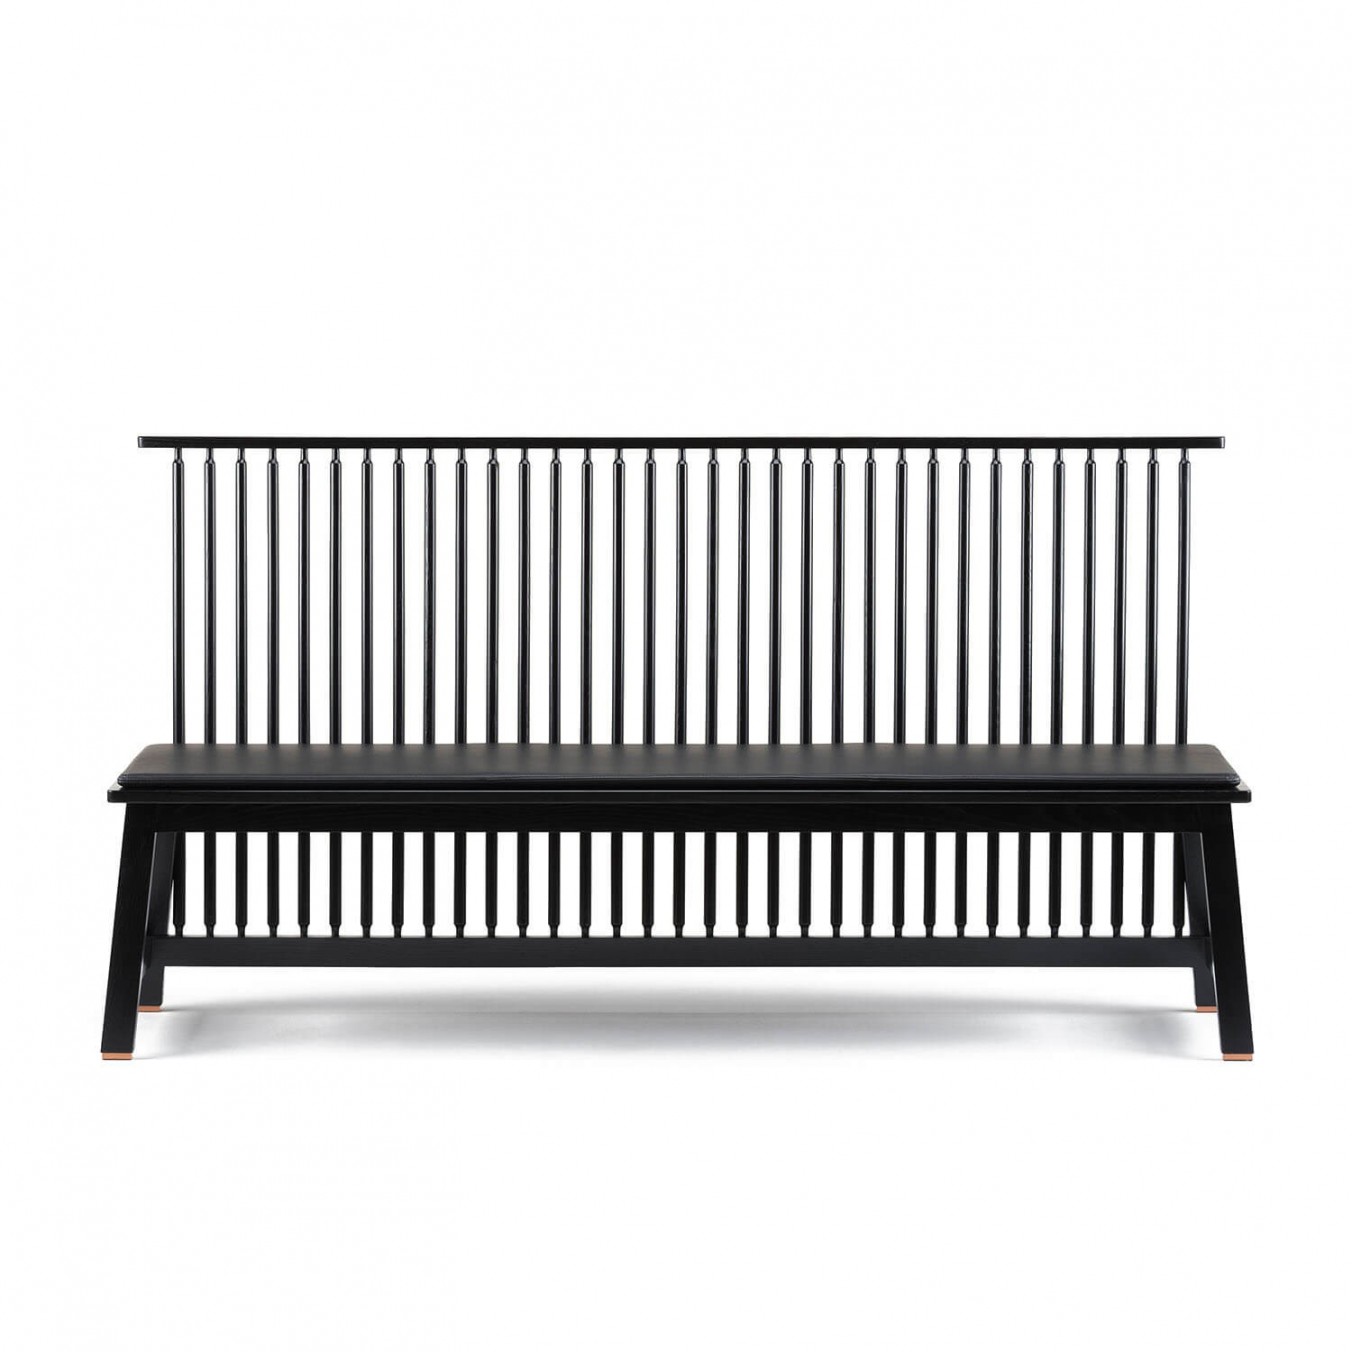 BENCH WITH BACK